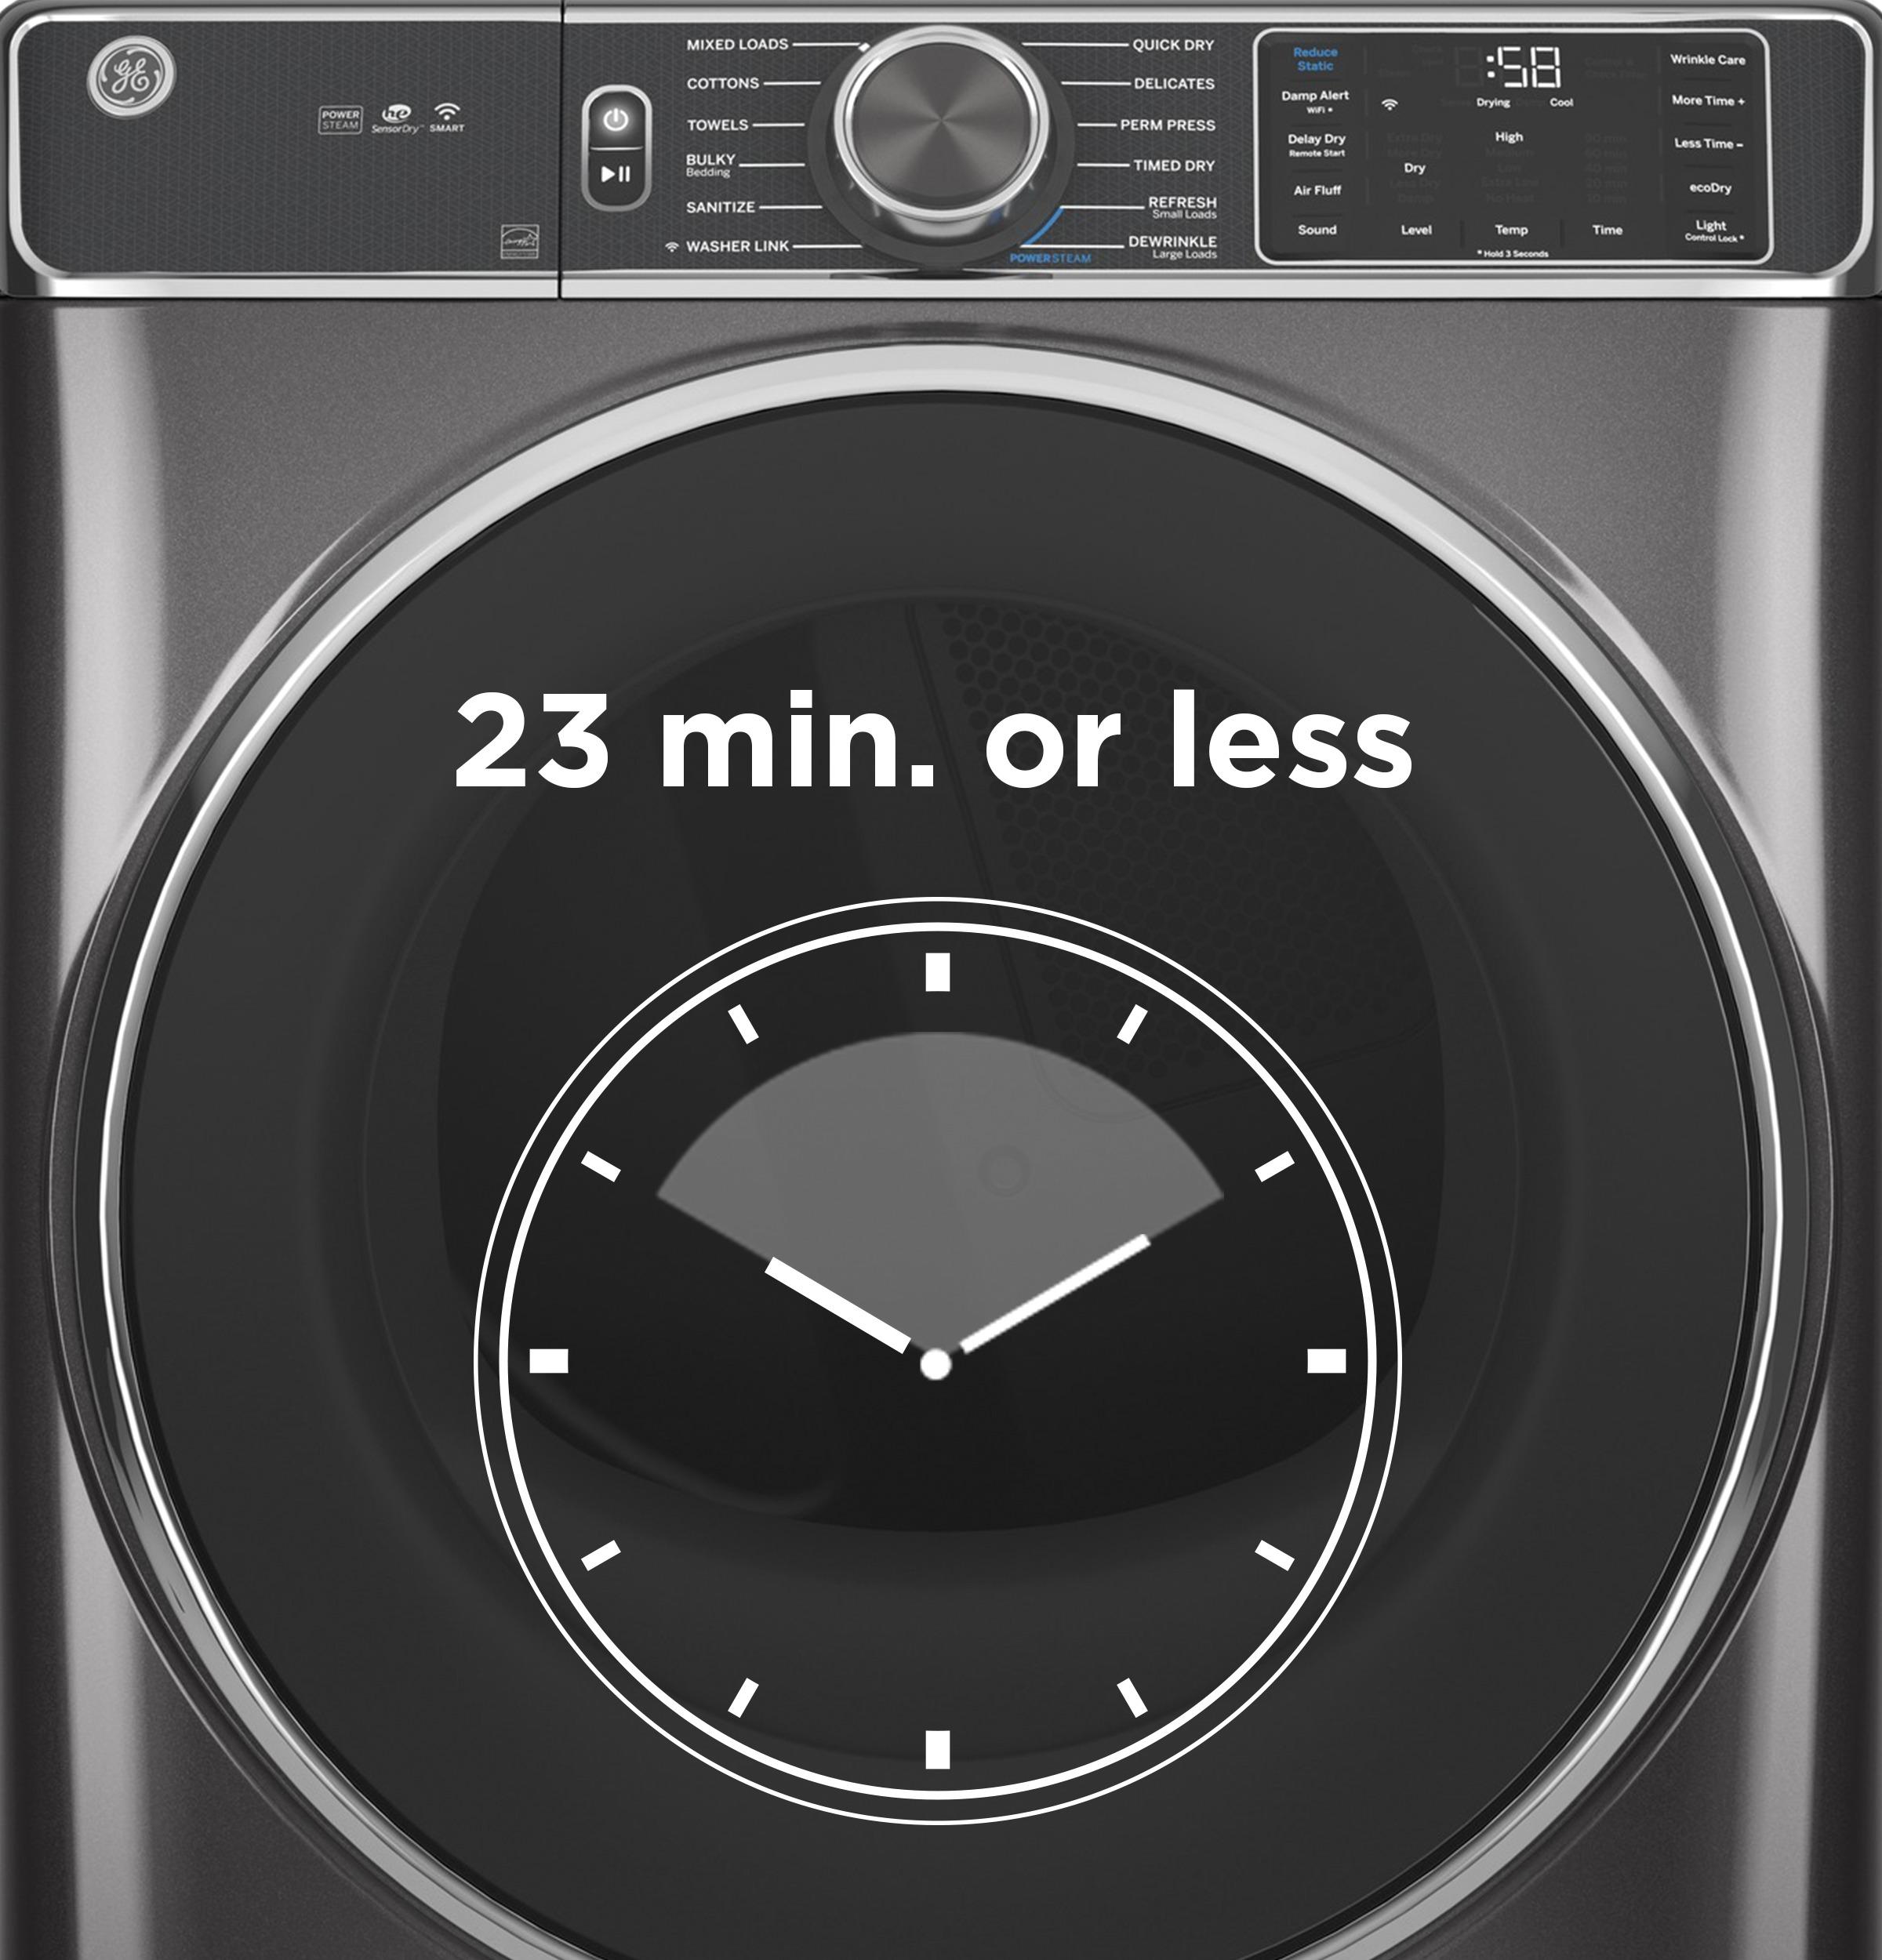 Ge Appliances GFD65ESPVDS Ge® 7.8 Cu. Ft. Capacity Smart Front Load Electric Dryer With Steam And Sanitize Cycle